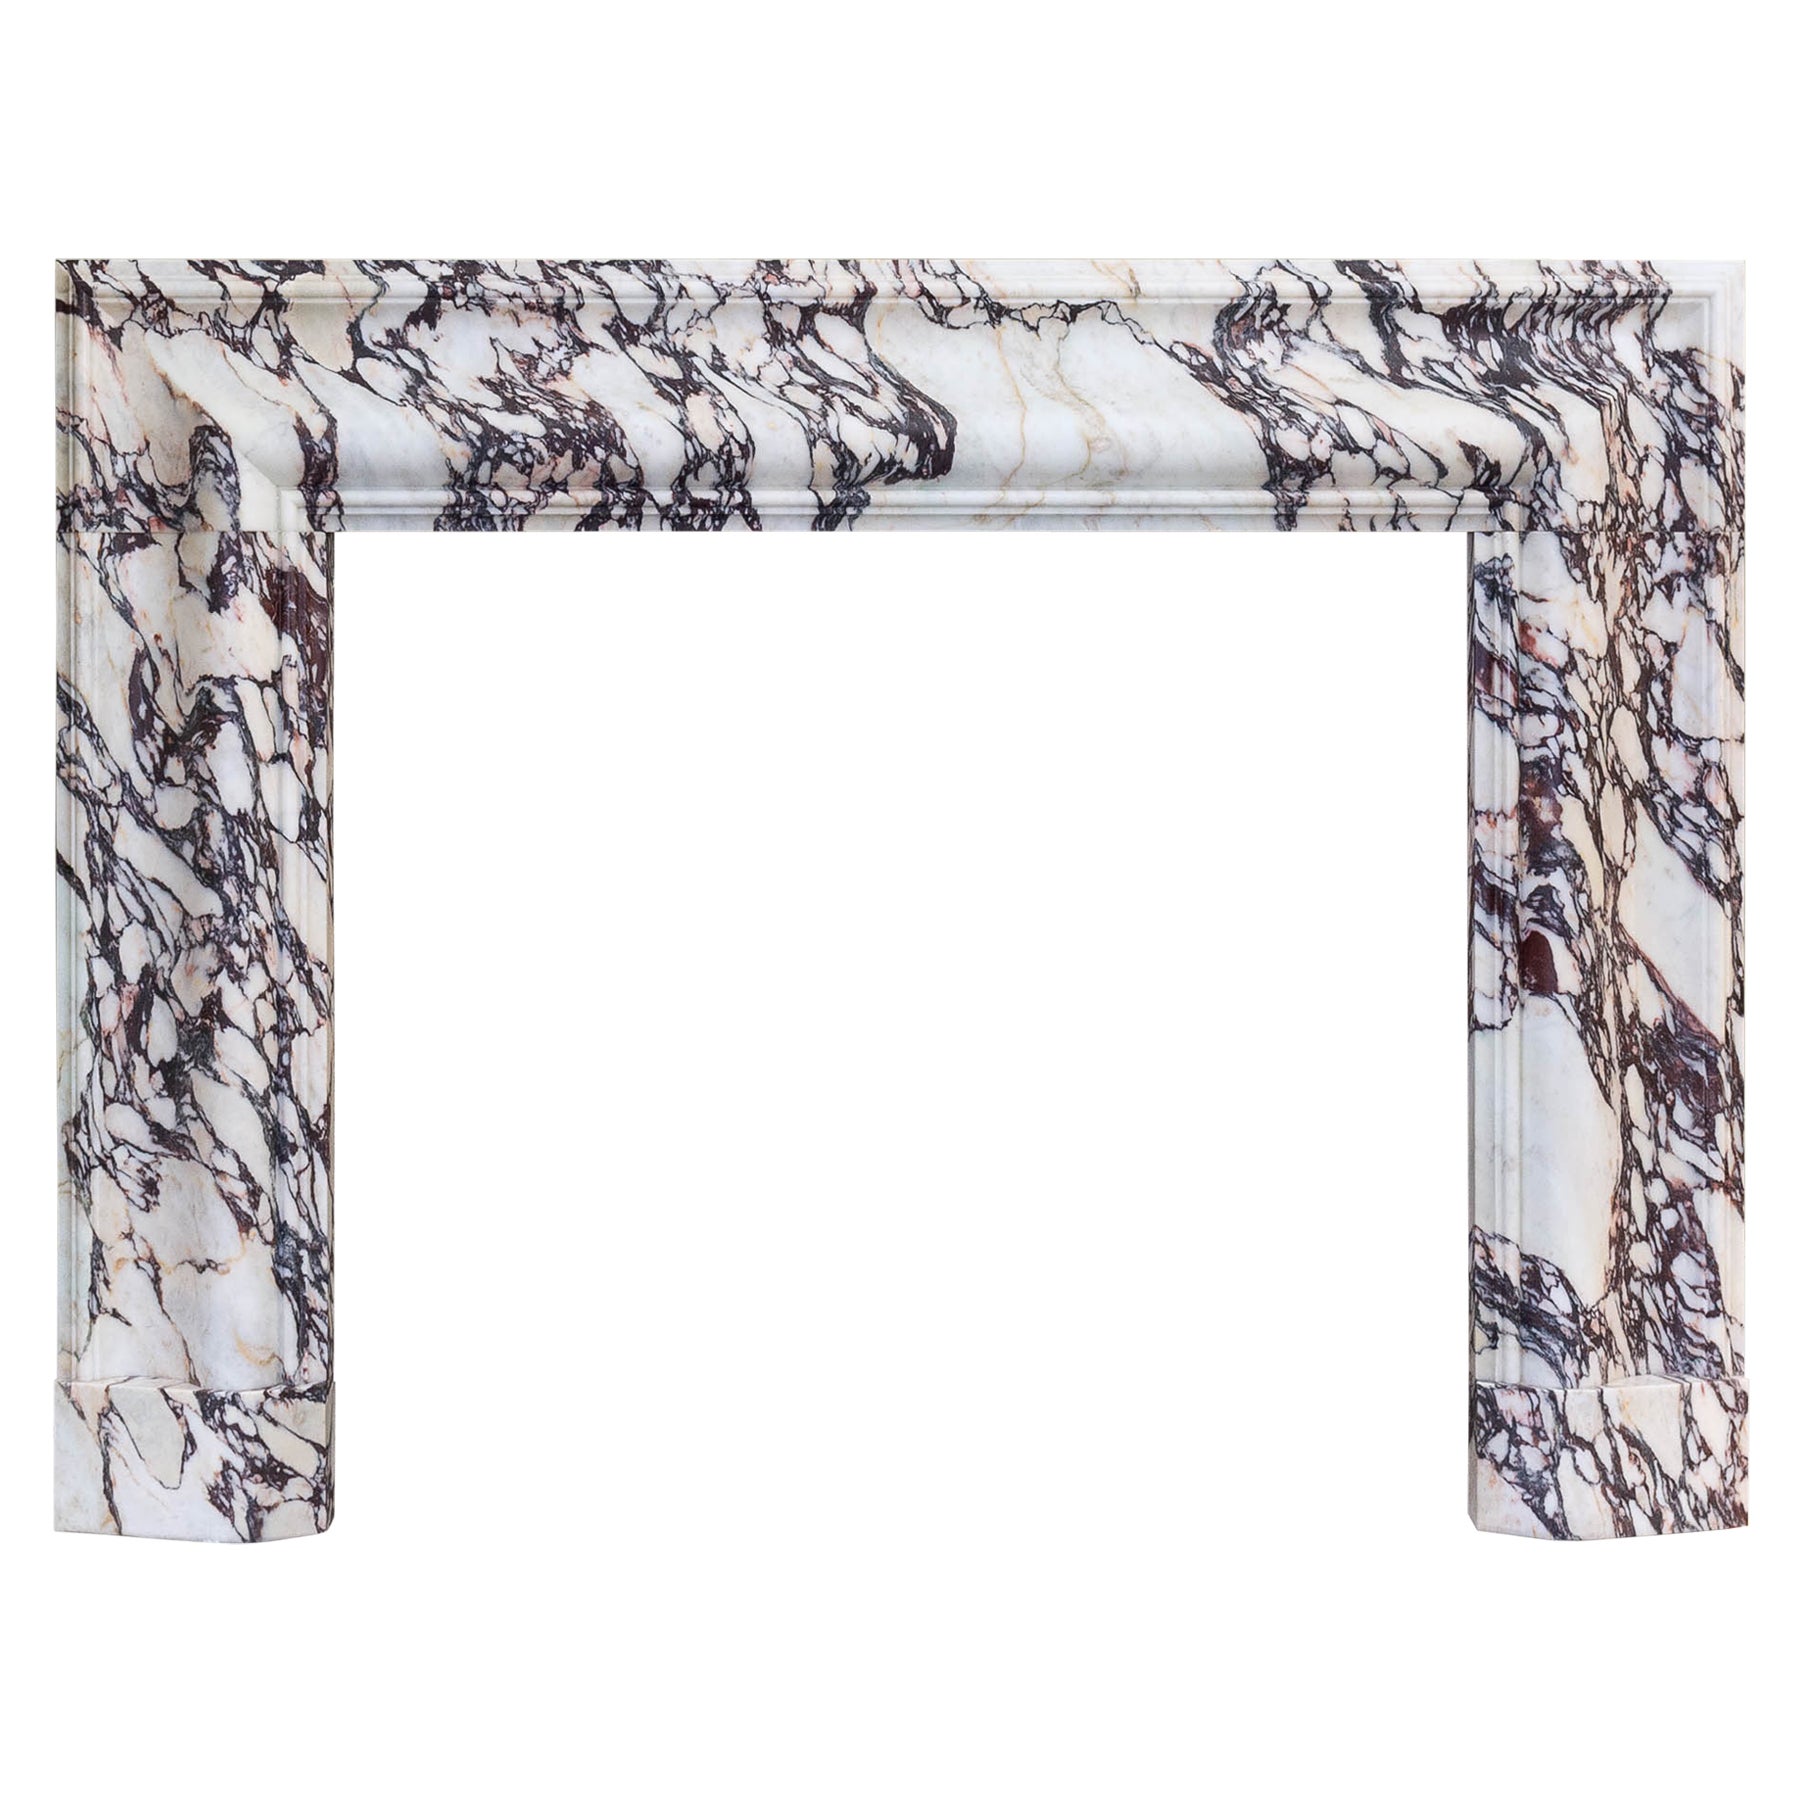 Bolection Fireplace in Breccia Viola Marble